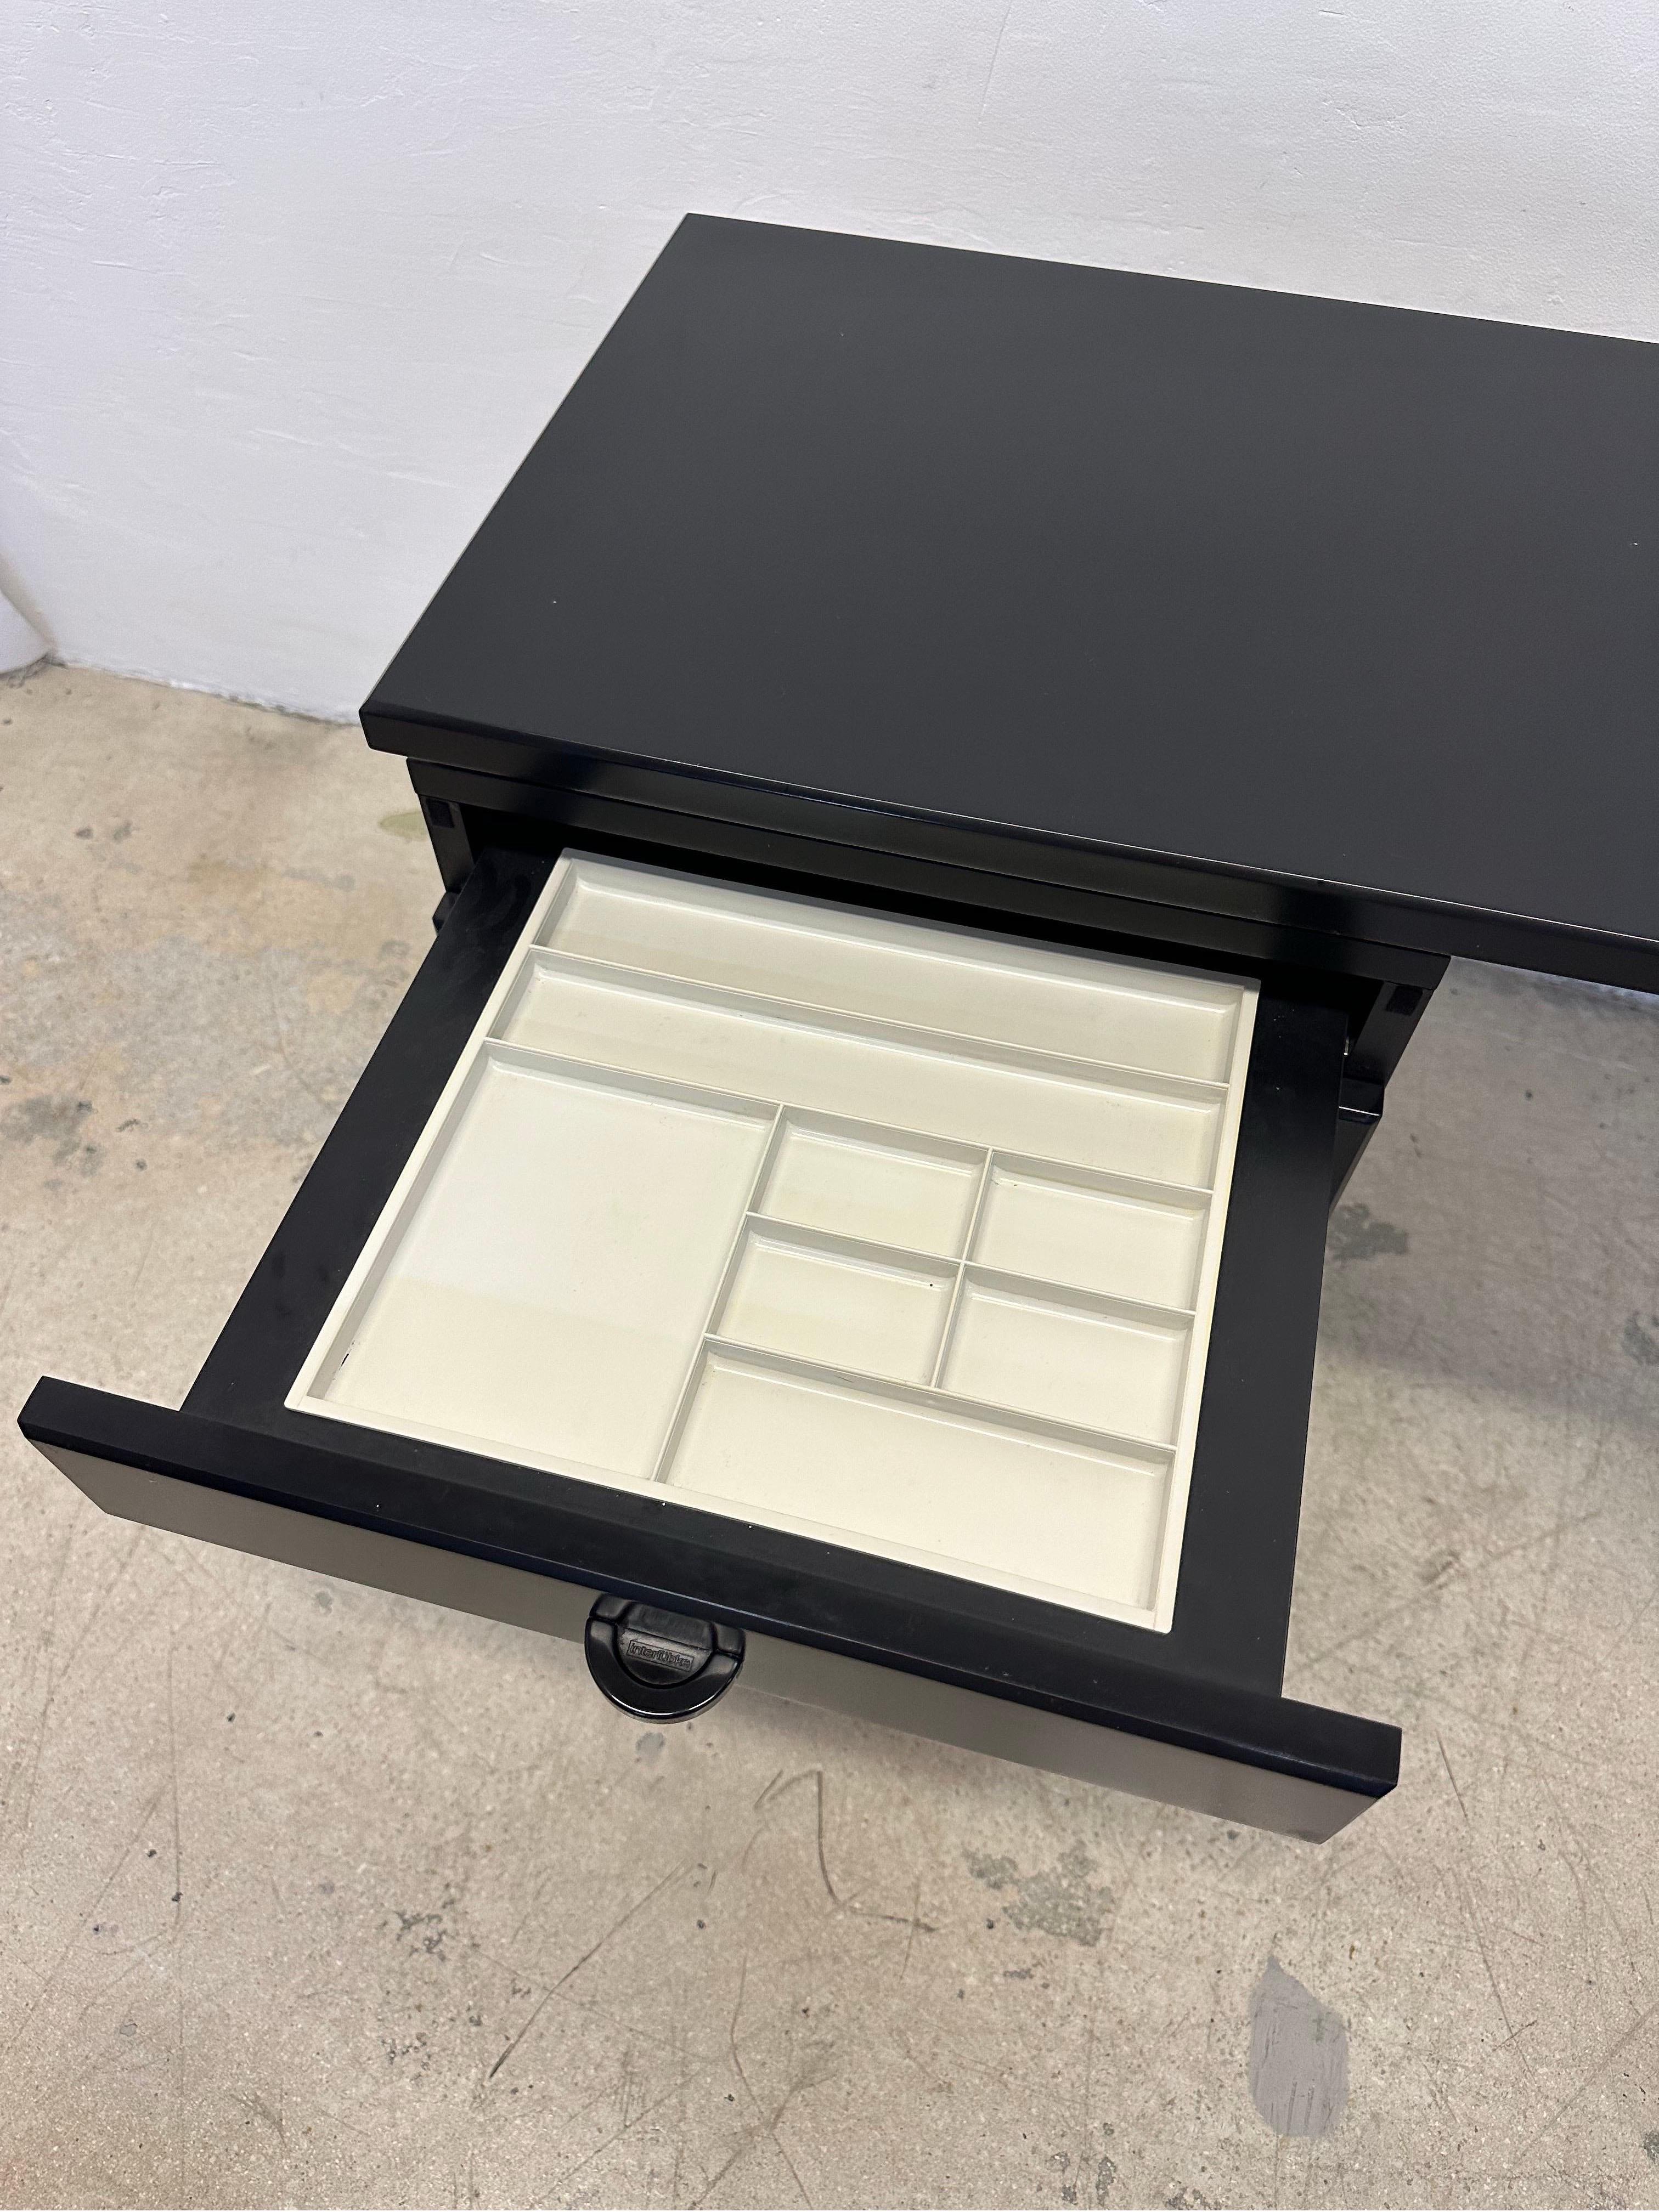 Postmodern Black Lacquered Desk by Interlubke, Germany 1980s For Sale 9